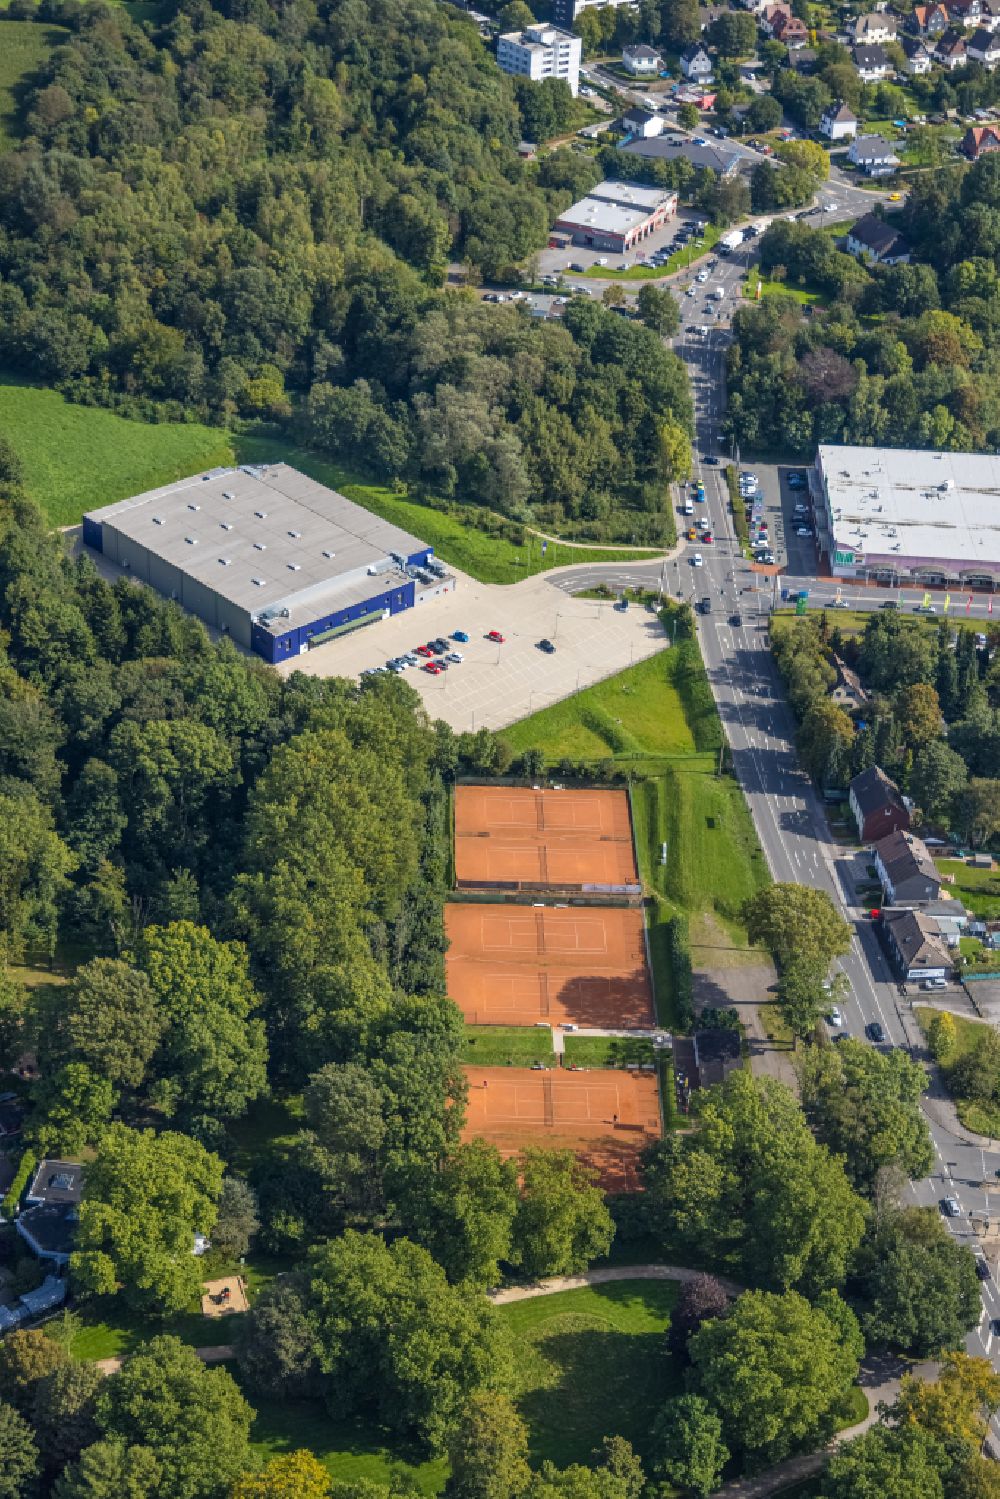 Aerial image Schwelm - Building complex of Parkhotel FRITZ am Brunnen in Schwelm in the state of North Rhine-Westphalia. Tennis courts are located in the background